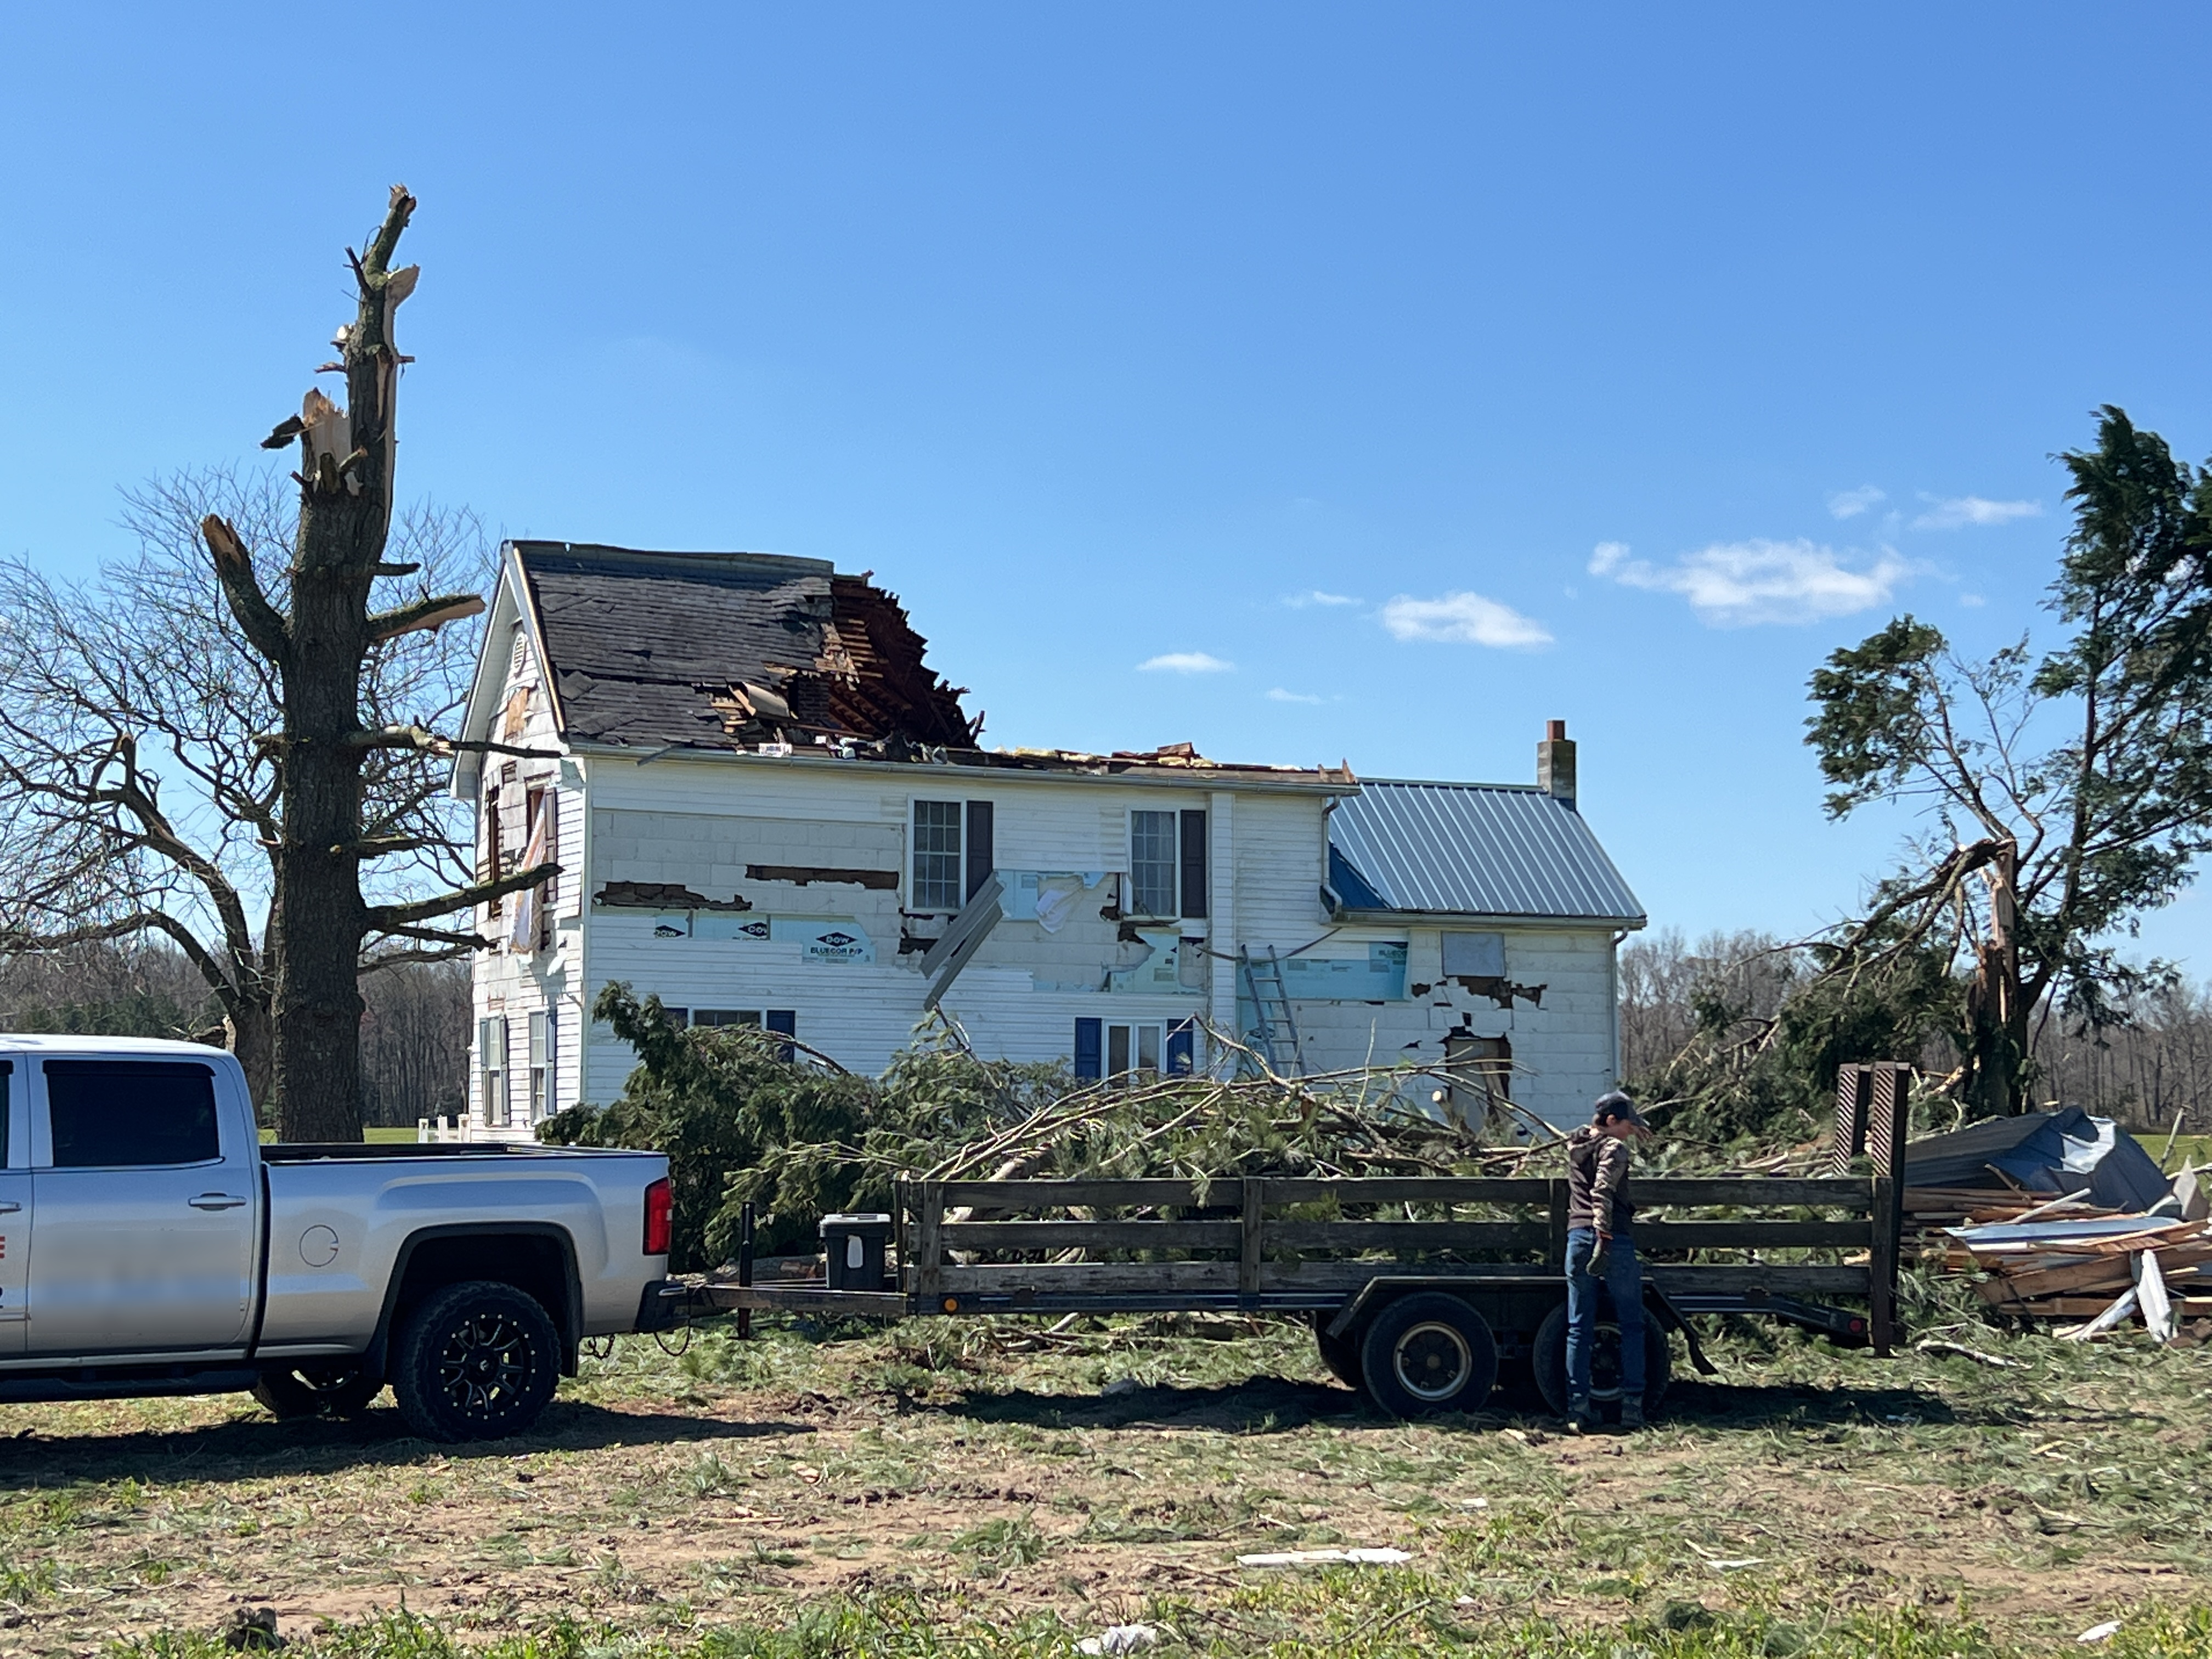 A single family home with large sections of the roof destroyed and much of the siding ripped off. This tornado damaged building is surrounded by snapped tree trunks.